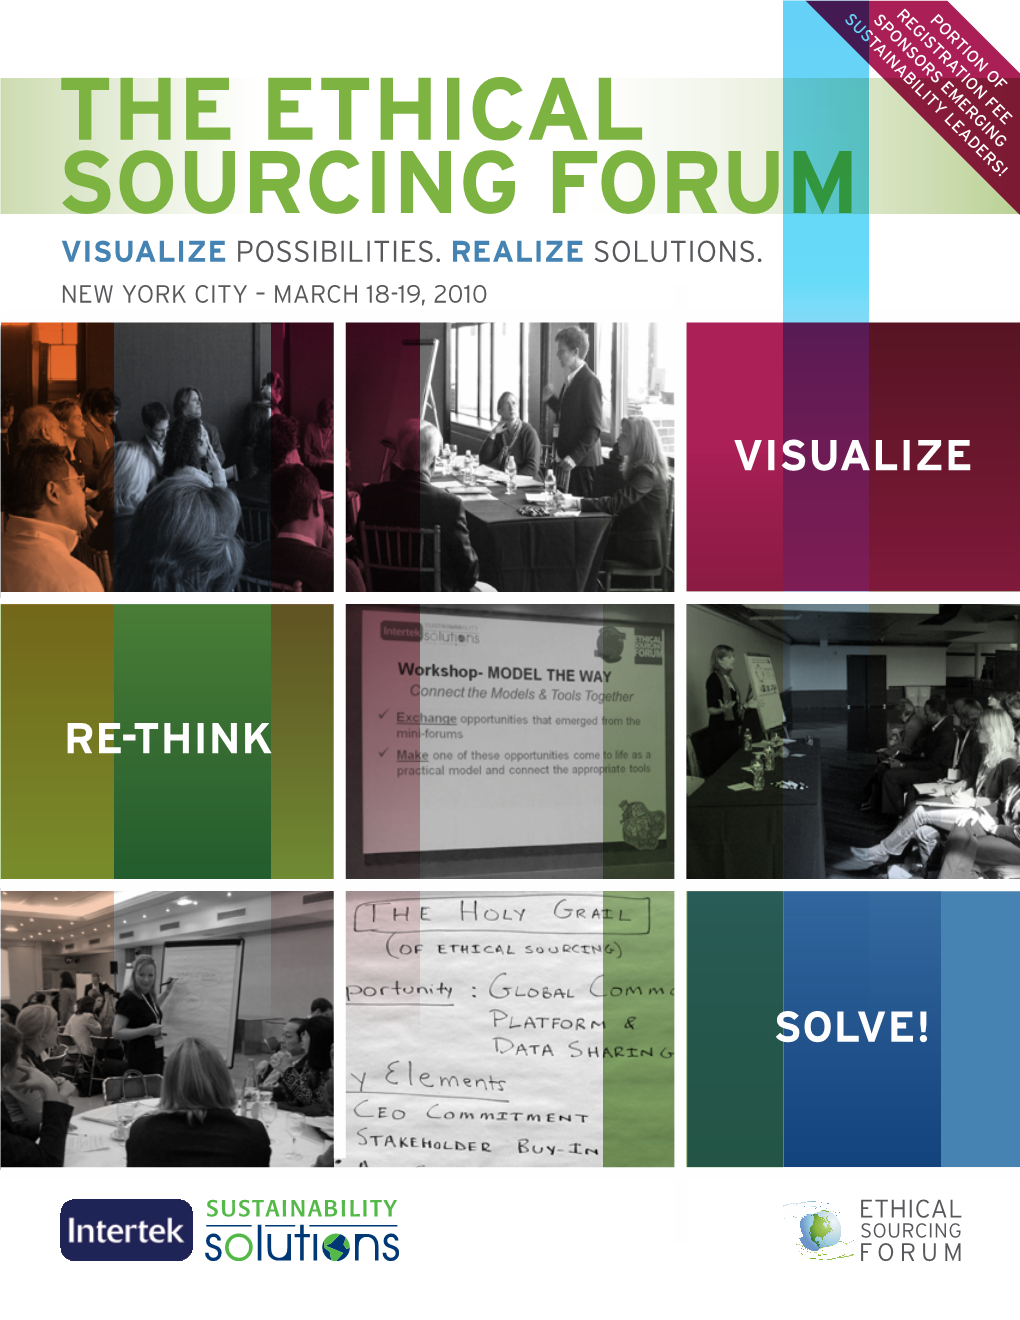 The Ethical Sourcing Forum